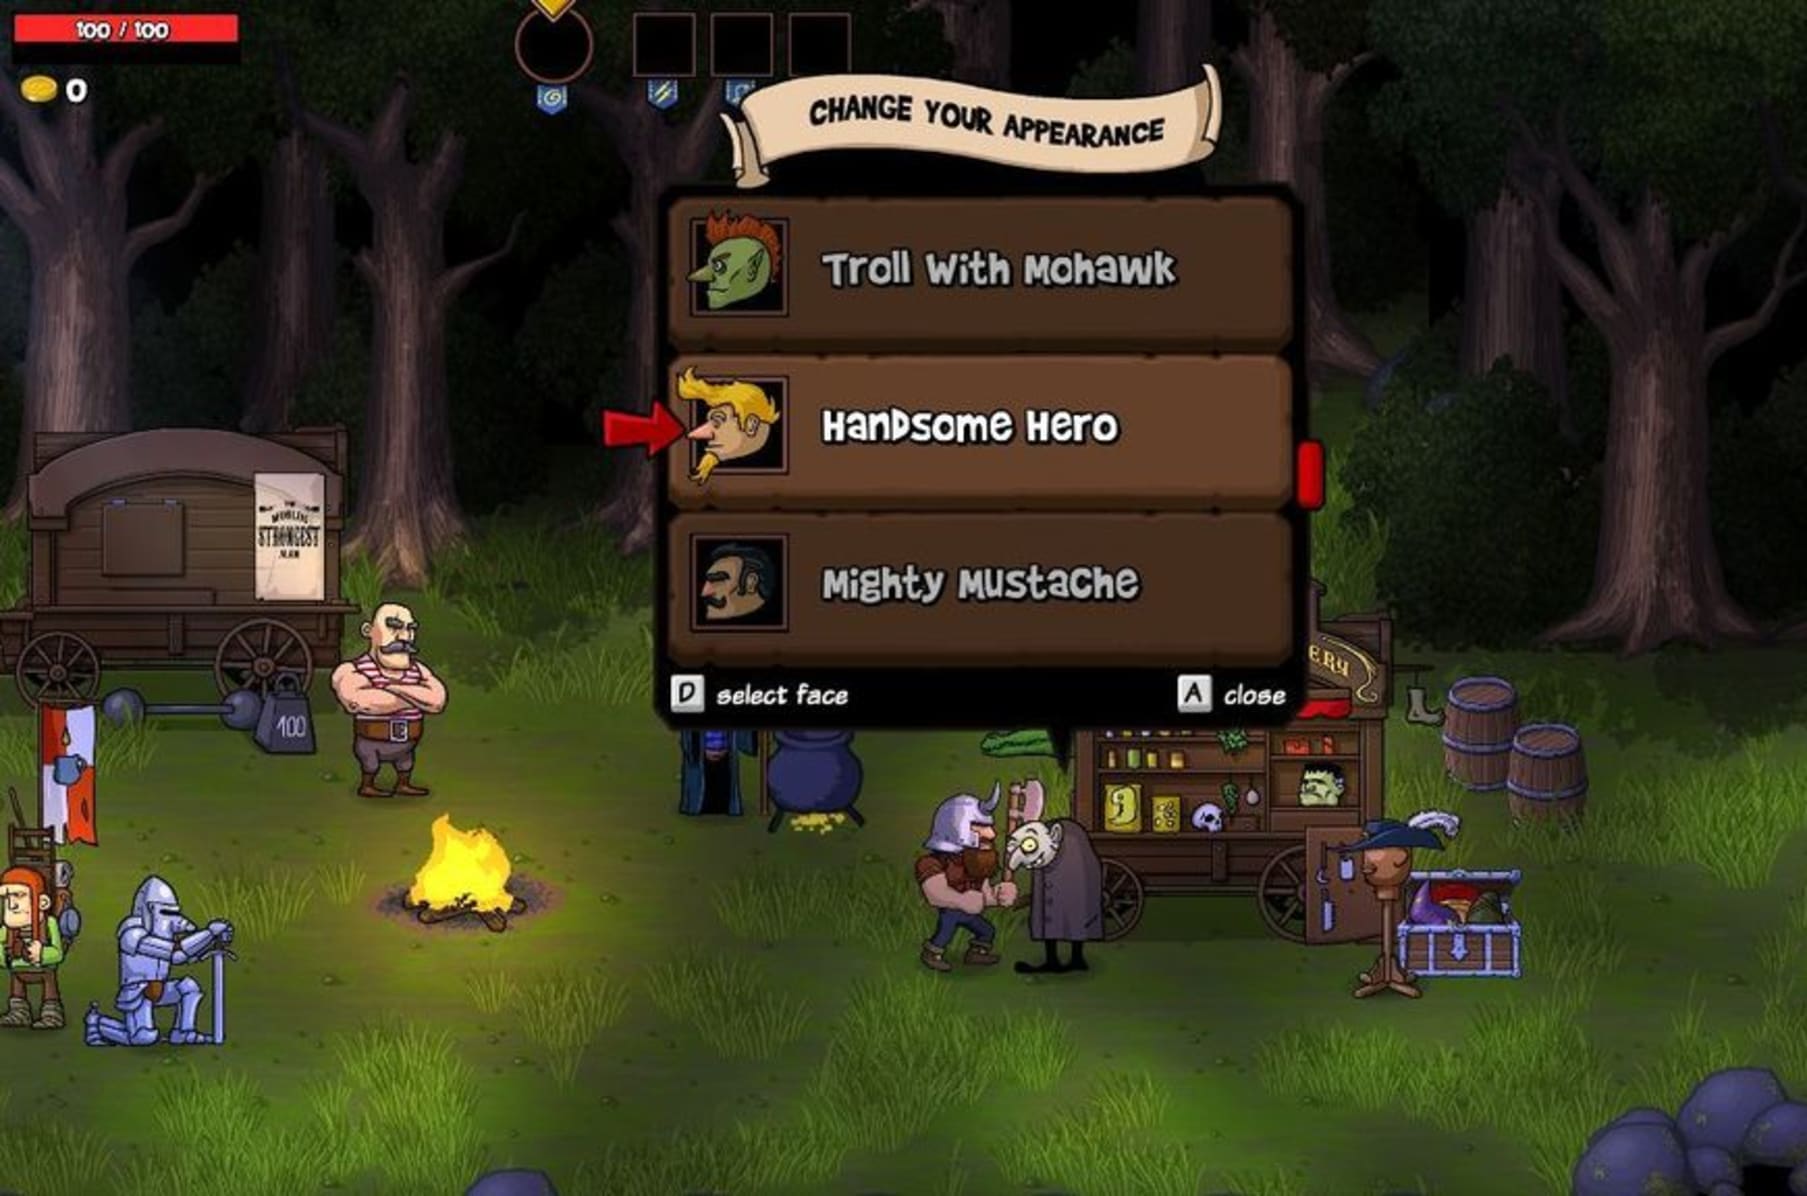 Dungeon Rampage Hack 2014